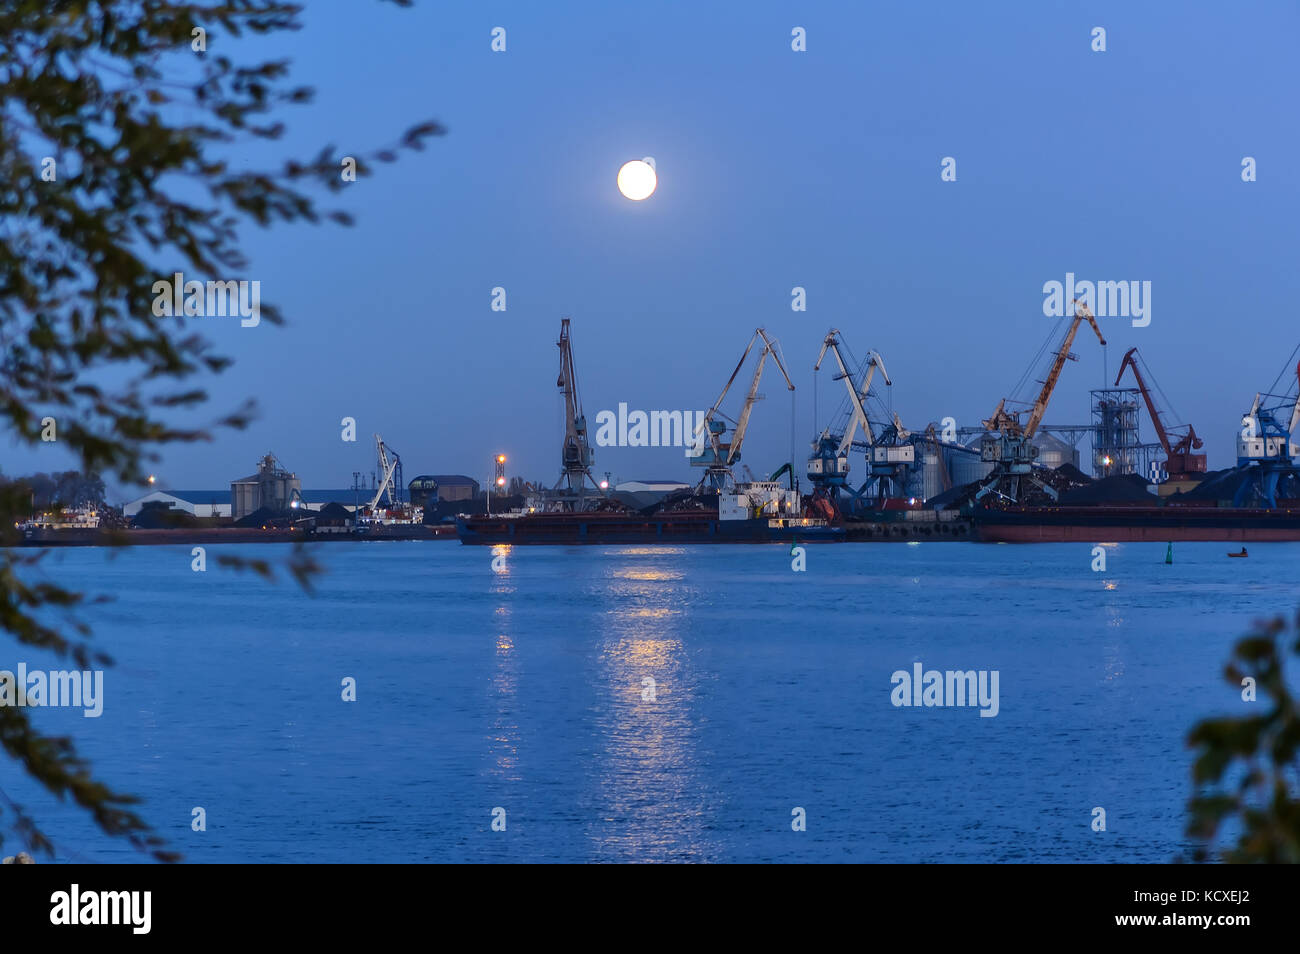 The river port at night. Loading. Specialized equipment. cranes River Stock Photo